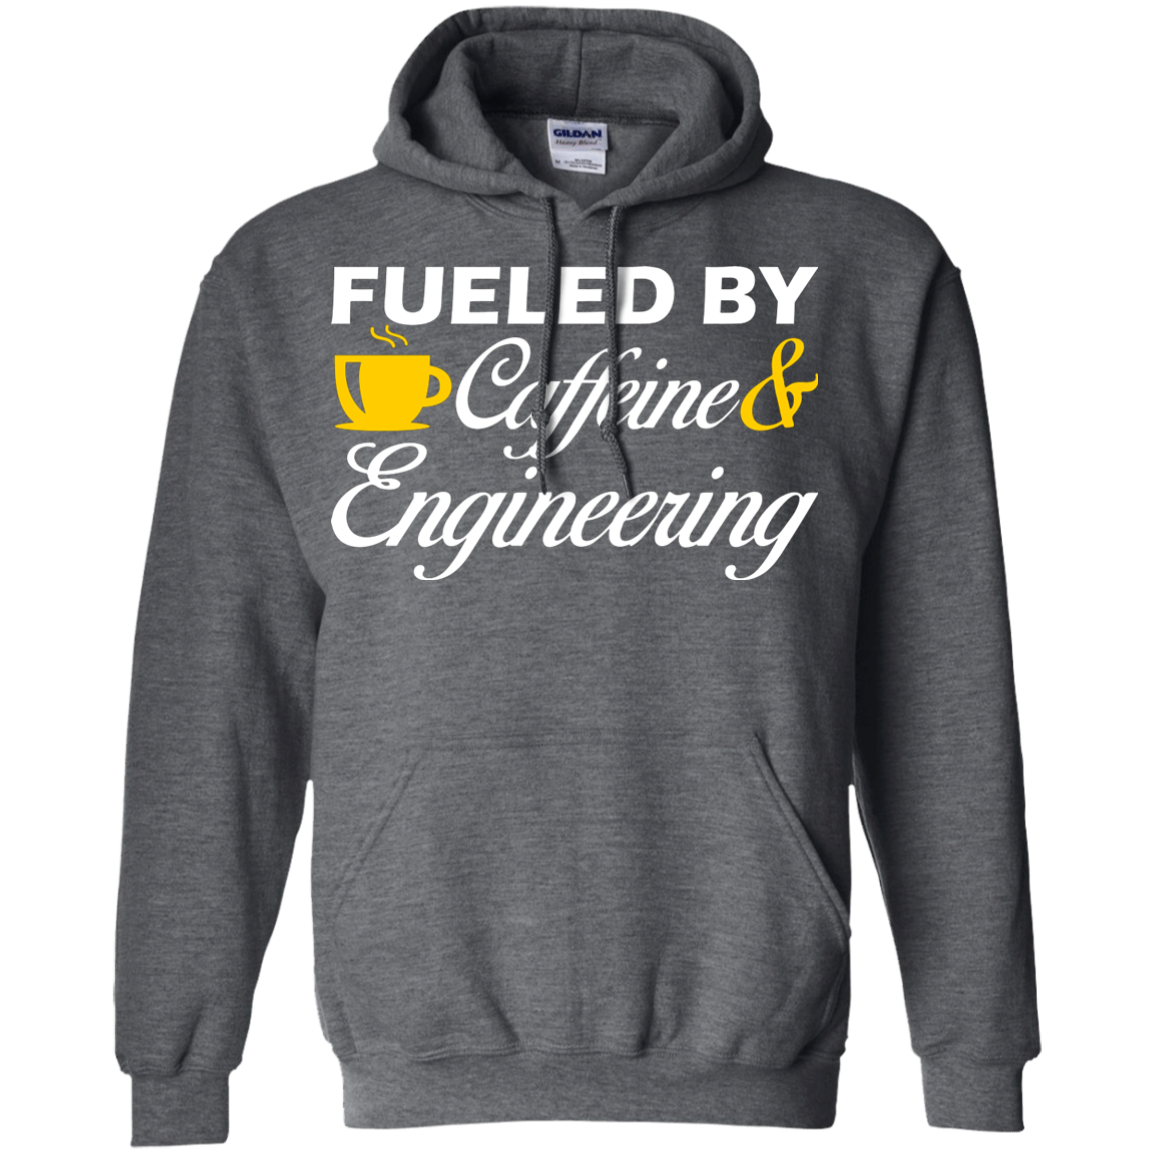 Fueled By Caffeine and Engineering